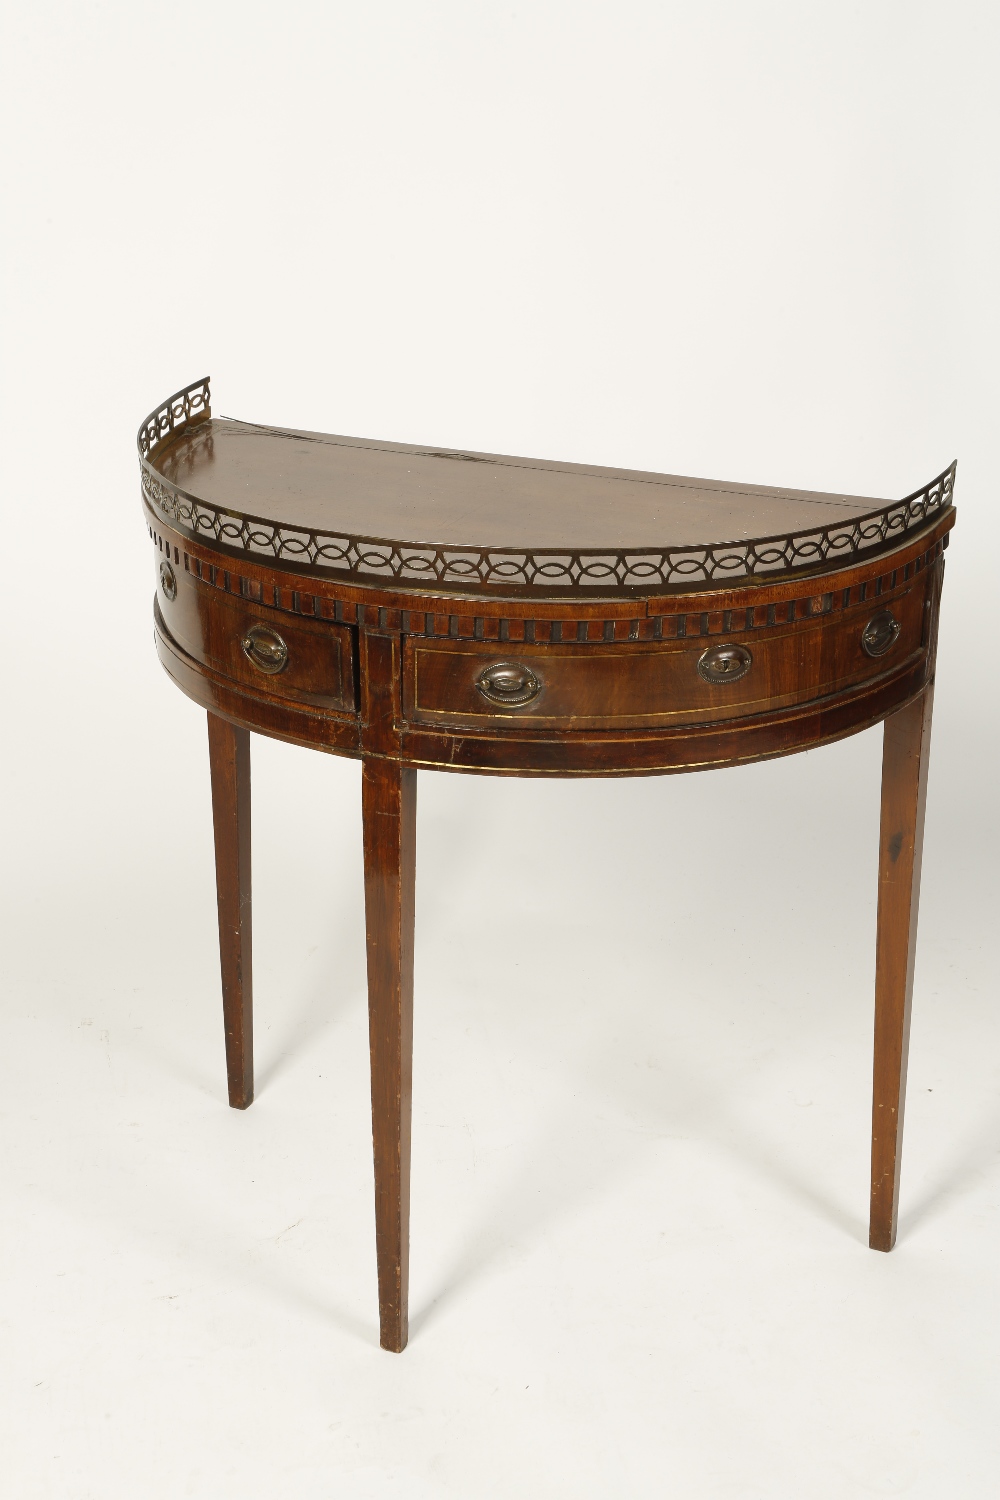 A 19TH CENTURY DUTCH MAHOGANY "D"-SHAPED SIDE TABLE with a pierced gilt metal frieze above two